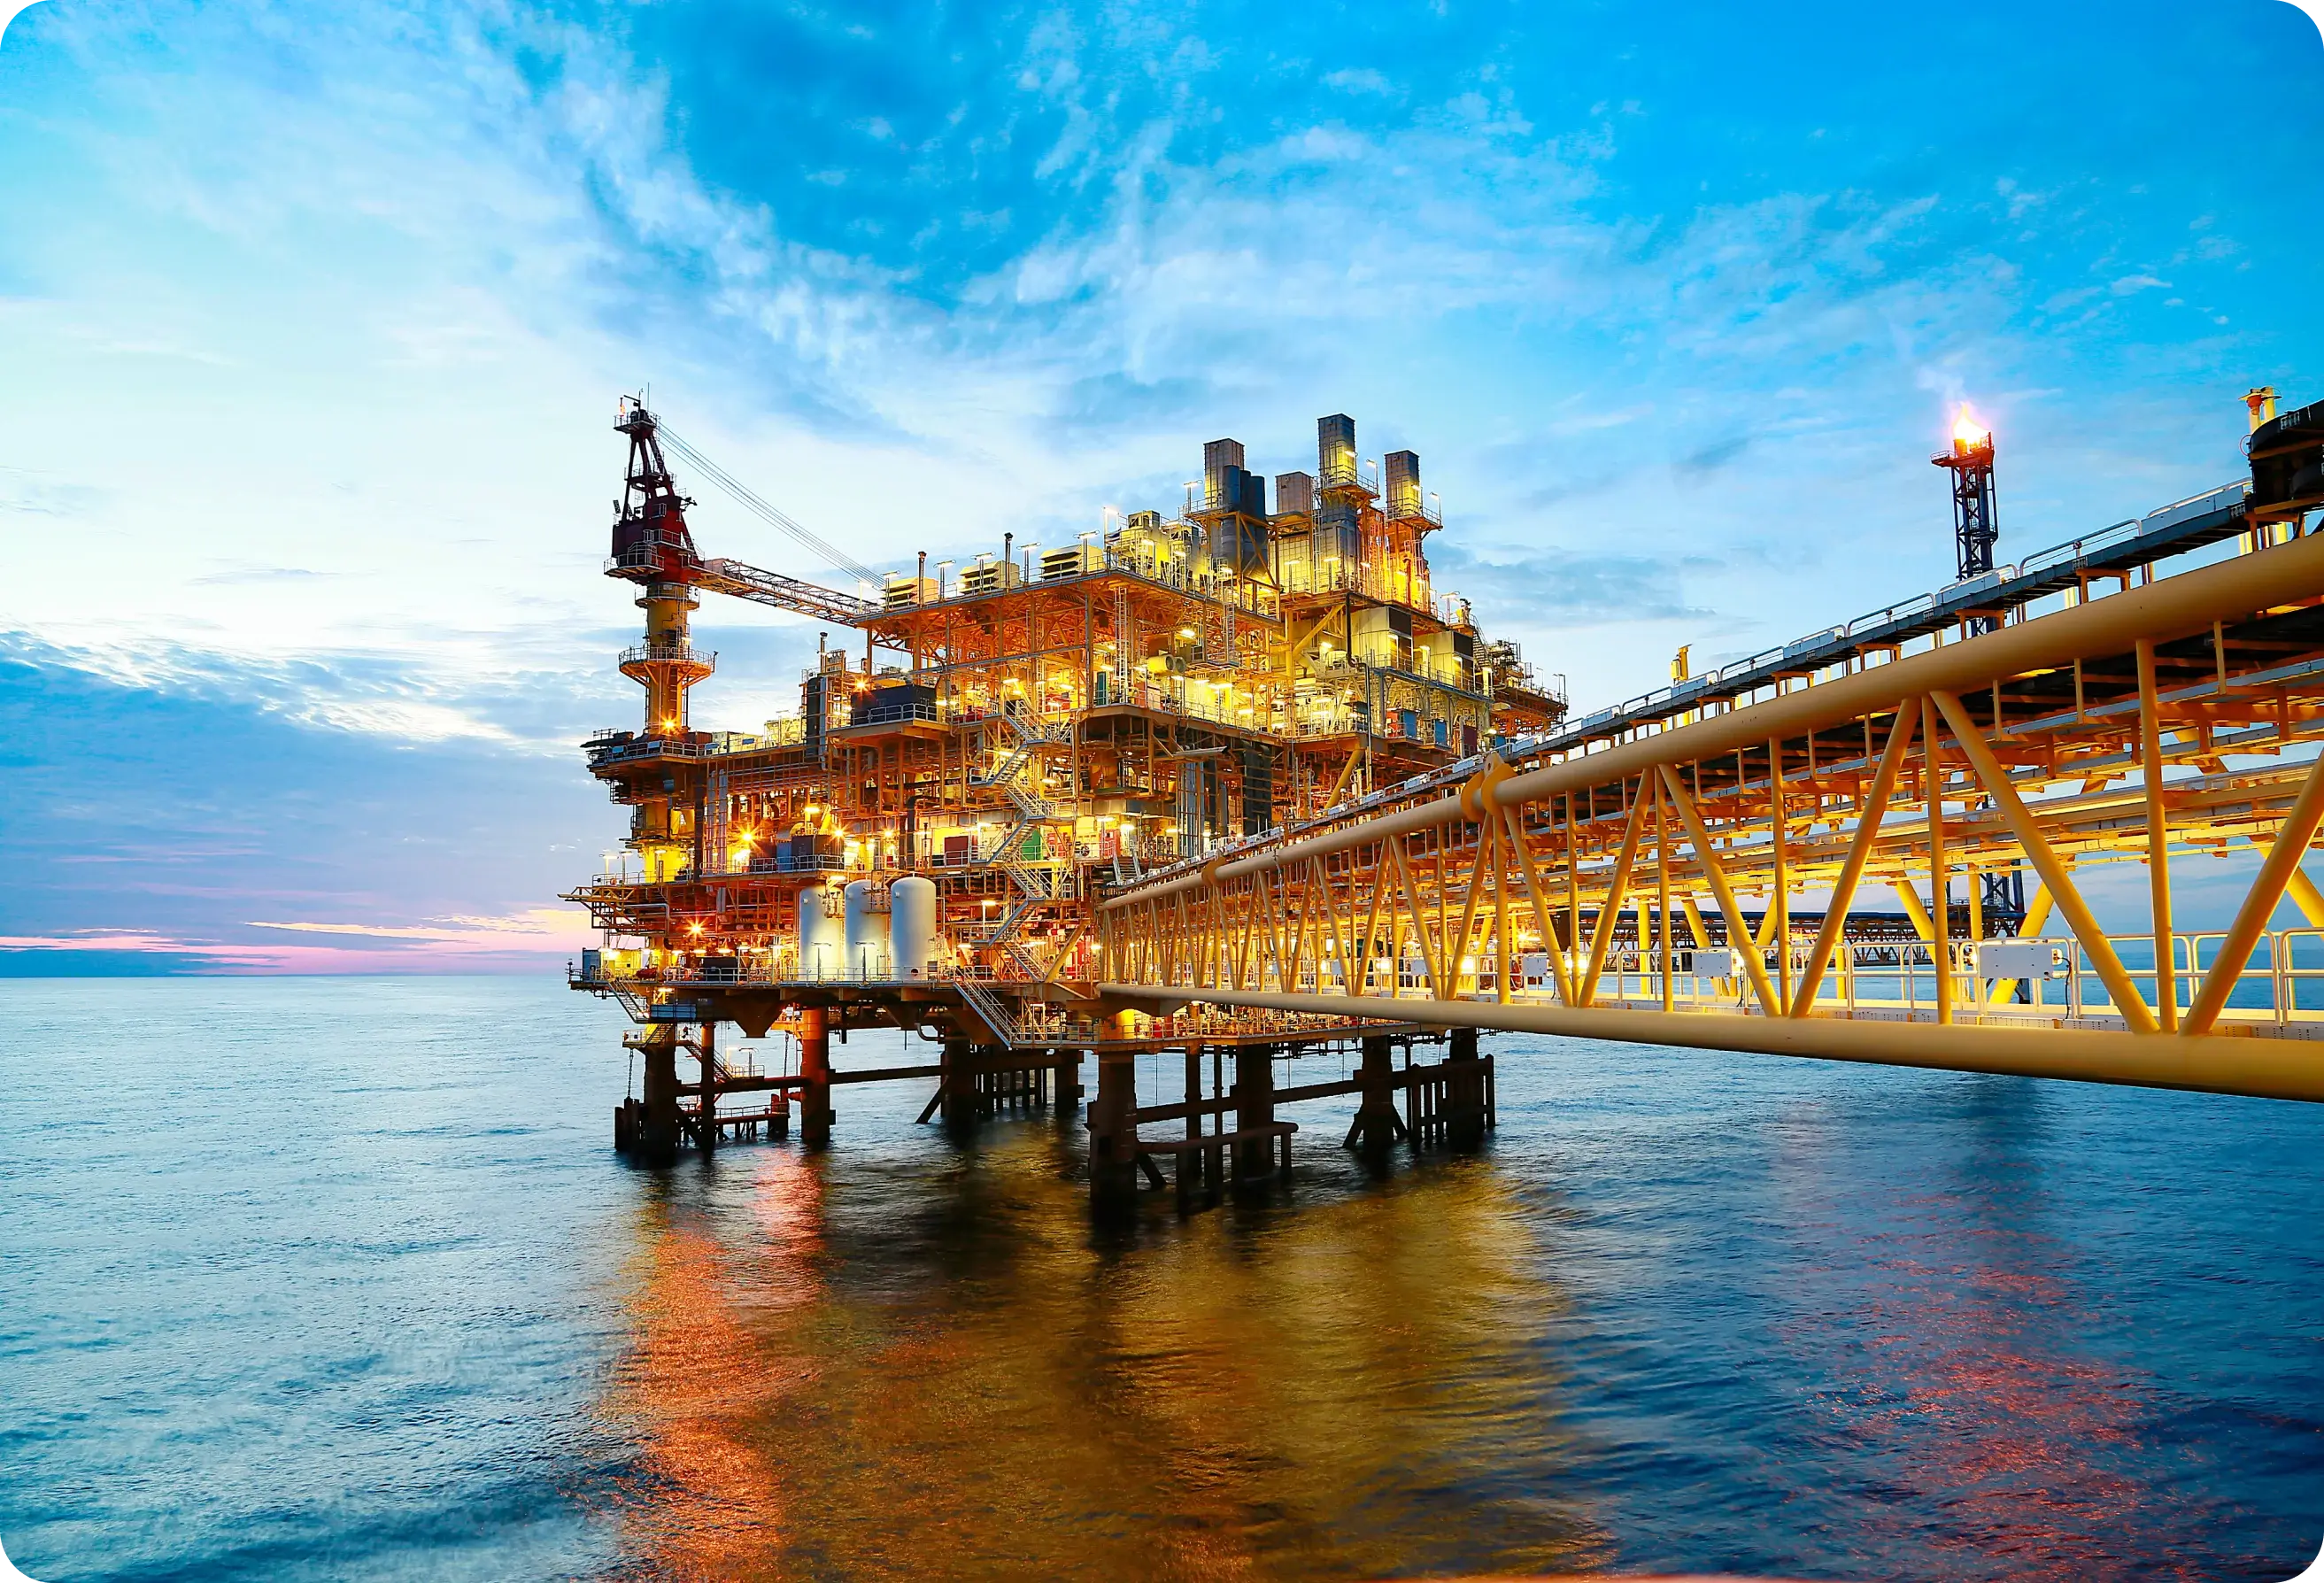 US Offshore Oil and Gas Infrastructure at Significant Risk of Cyberattacks